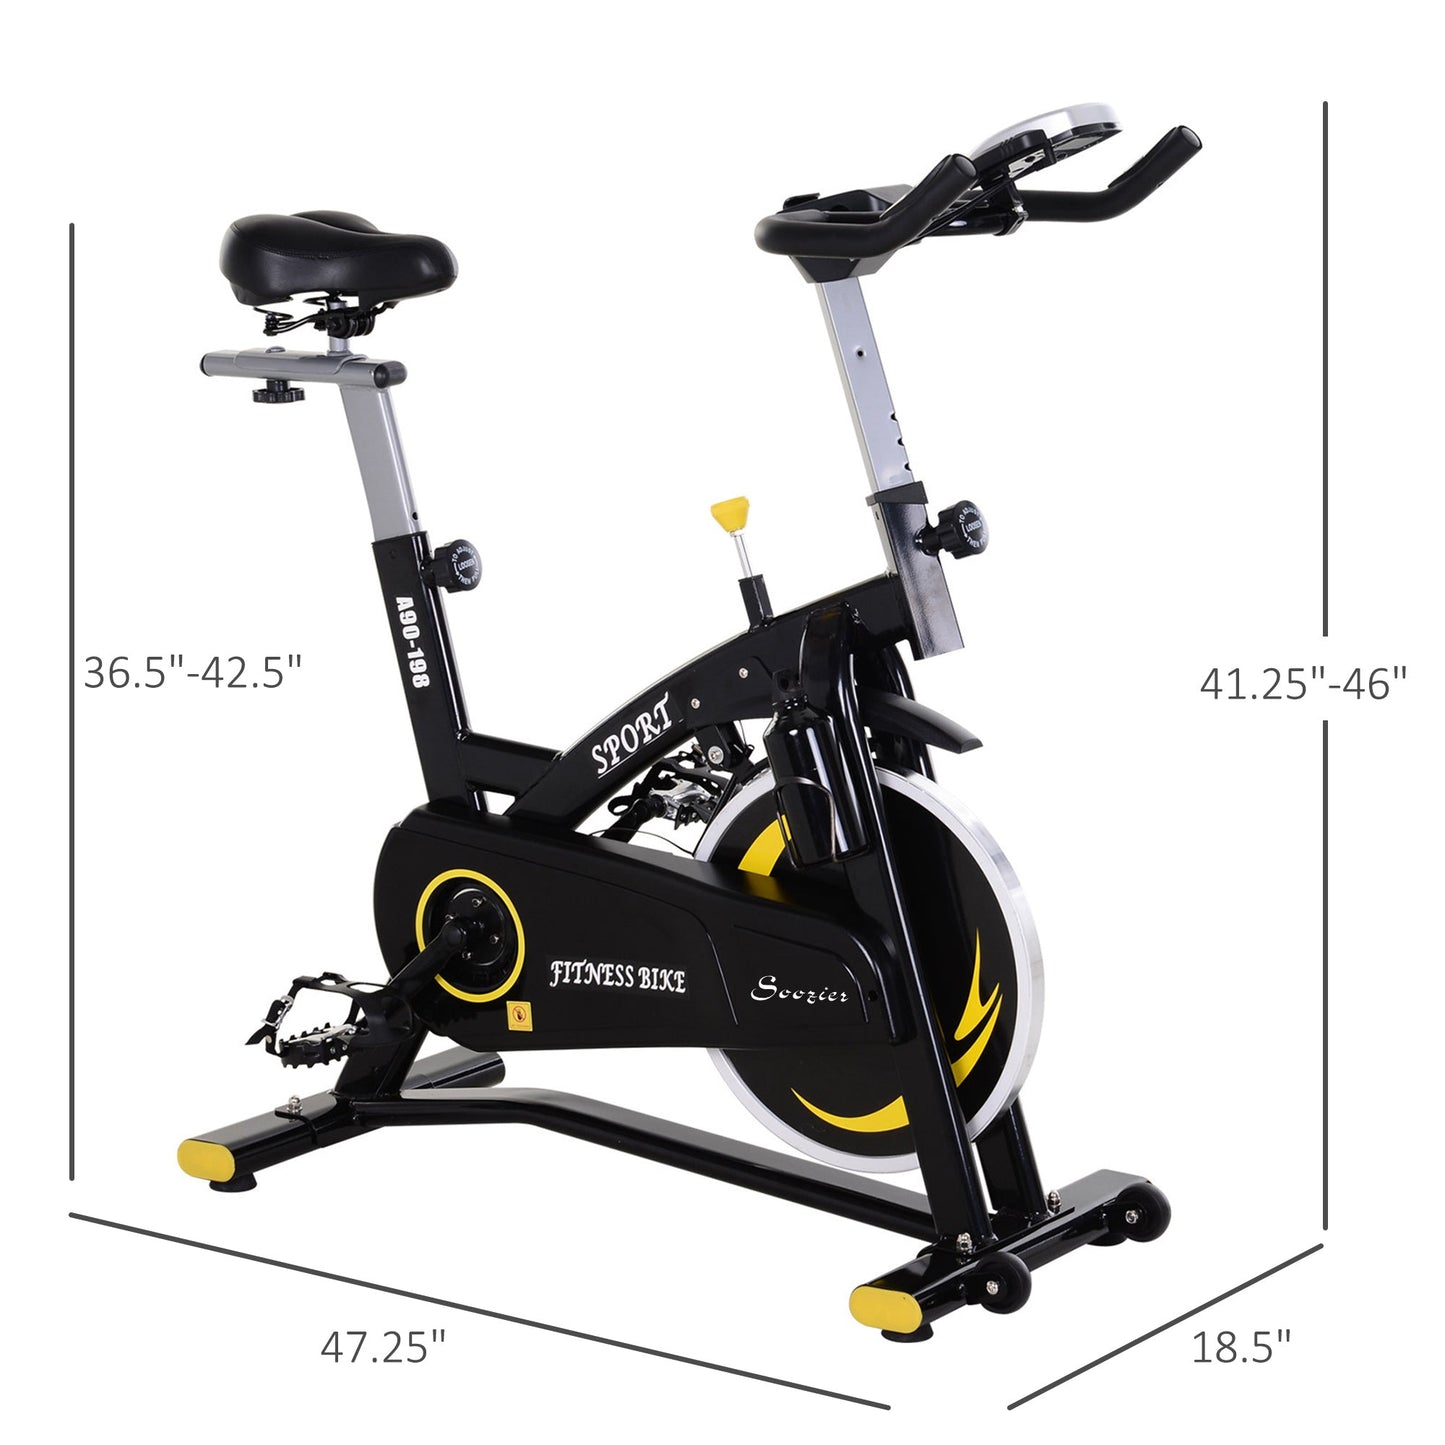 Magnetic Resistance Exercise Bike with LCD Monitor, Belt Drive Training Bicycle at Gallery Canada